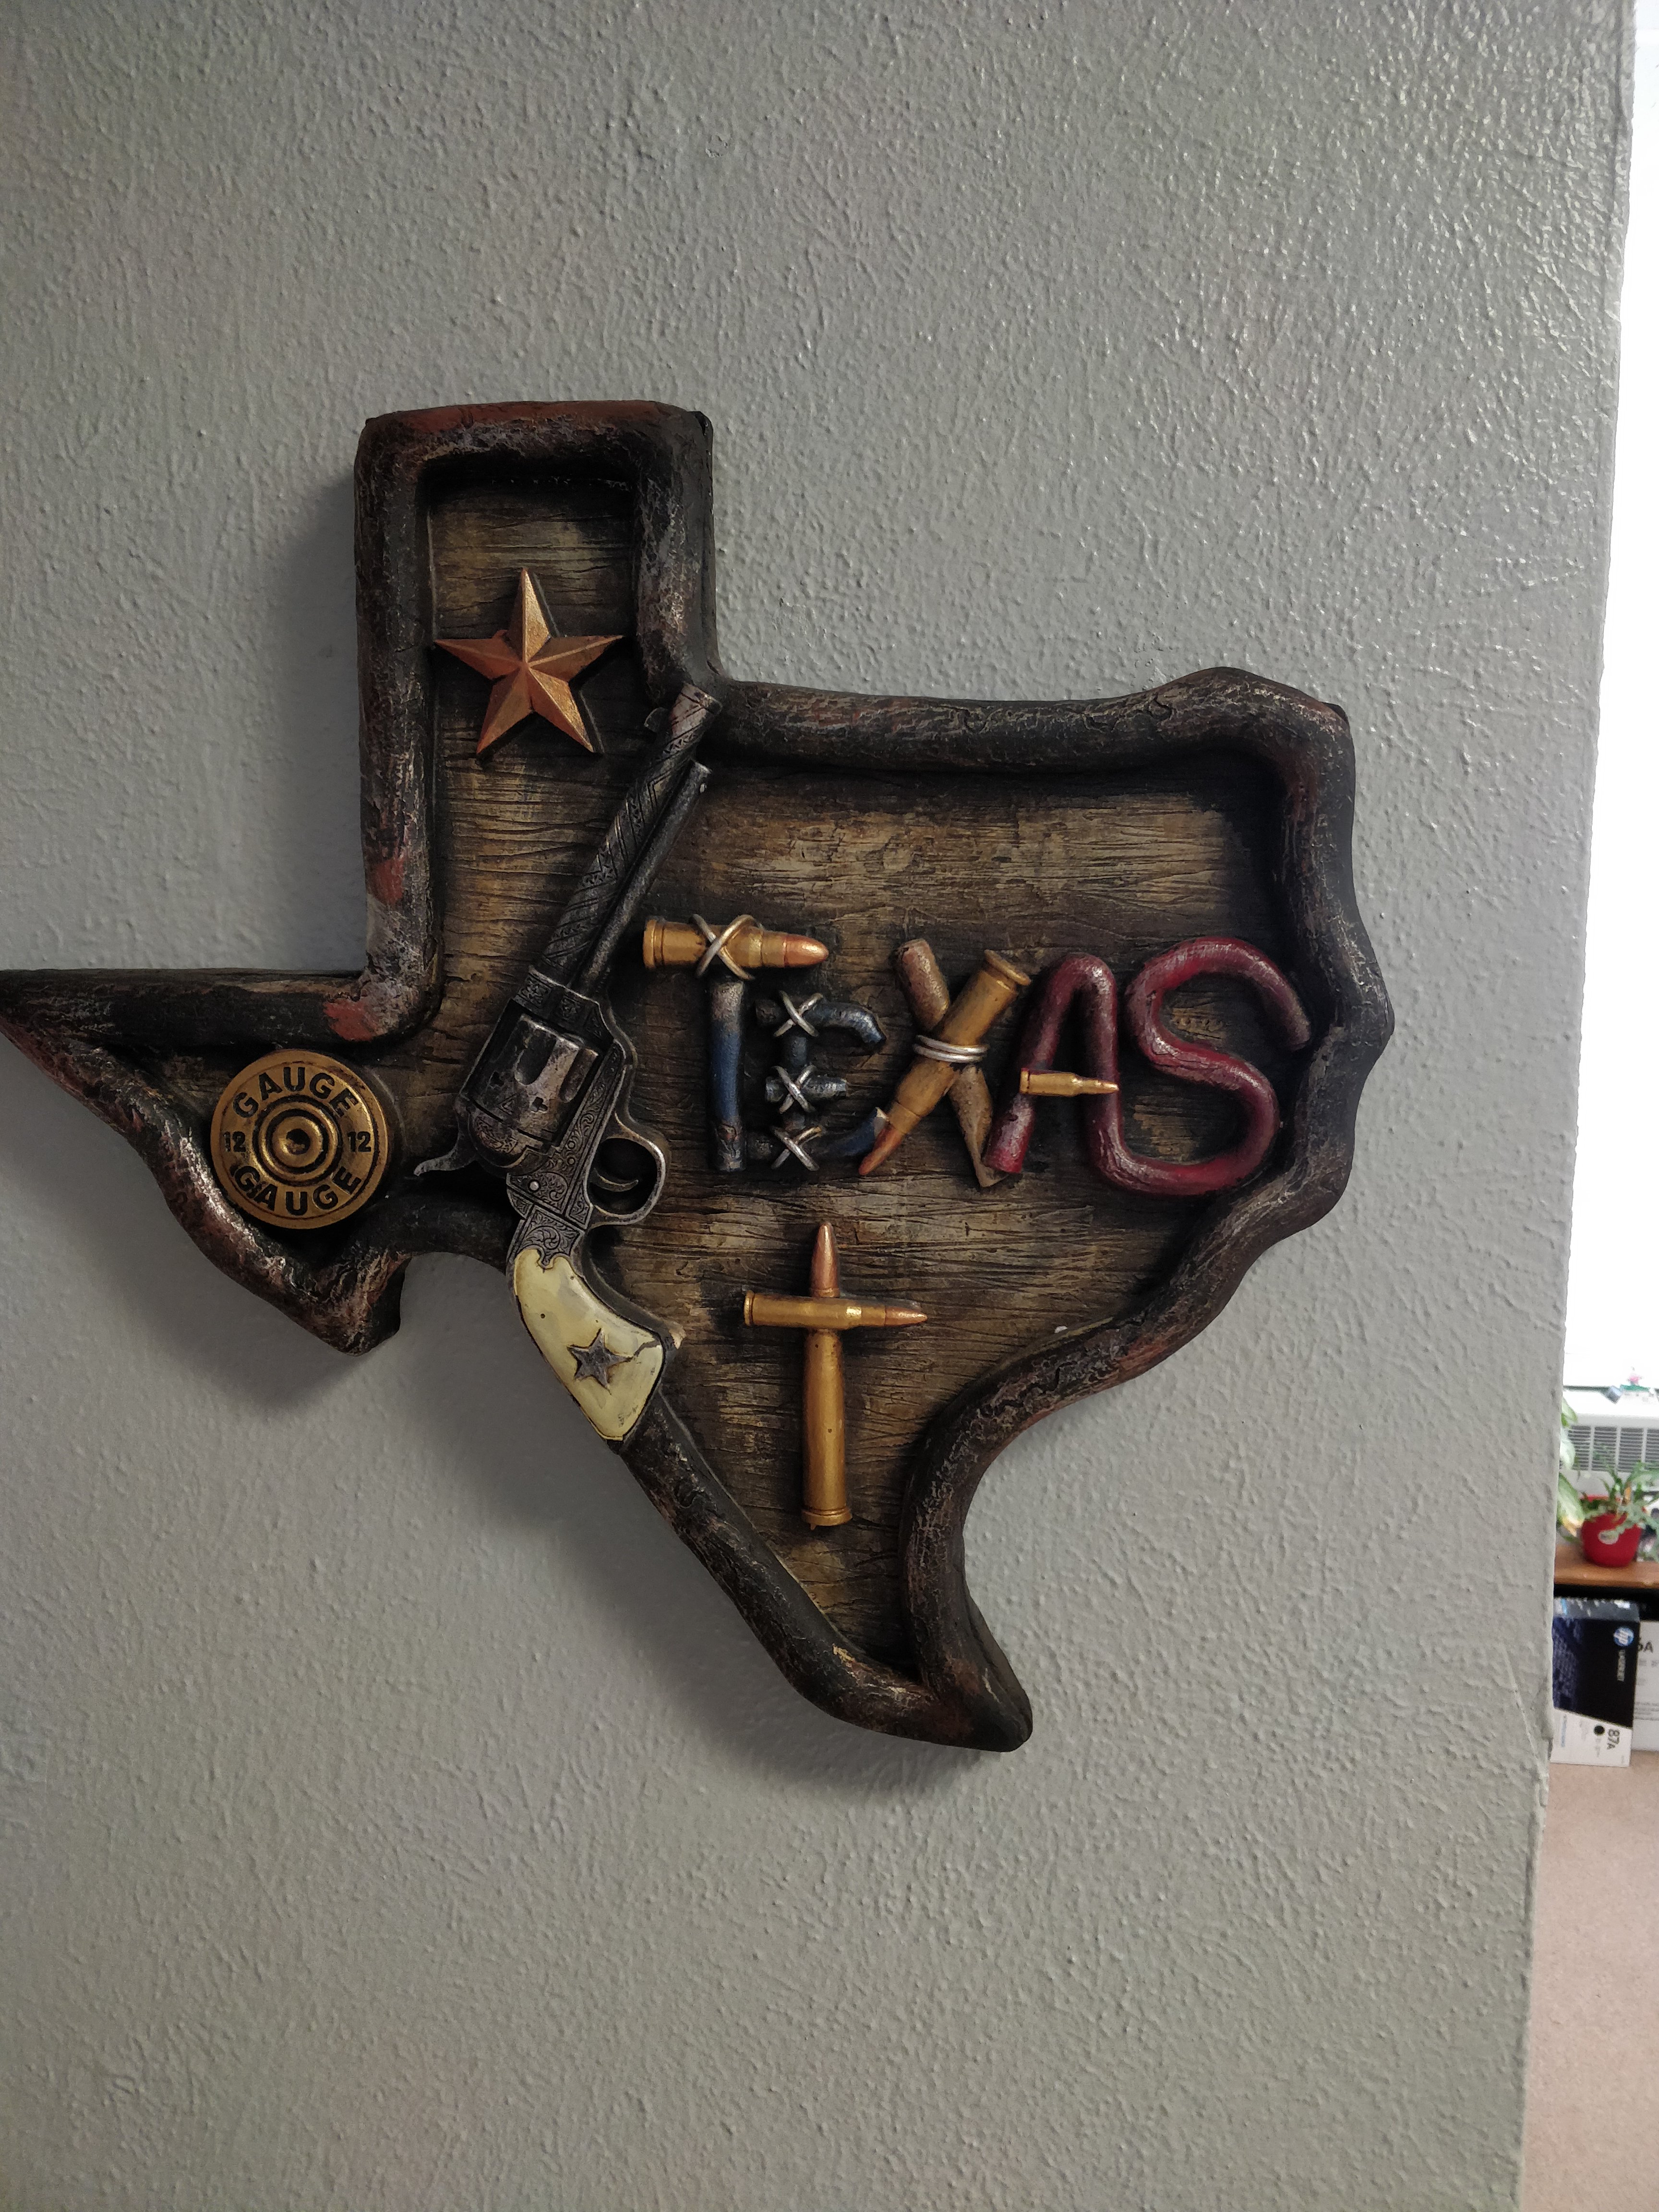 Texas sign in a city hall office